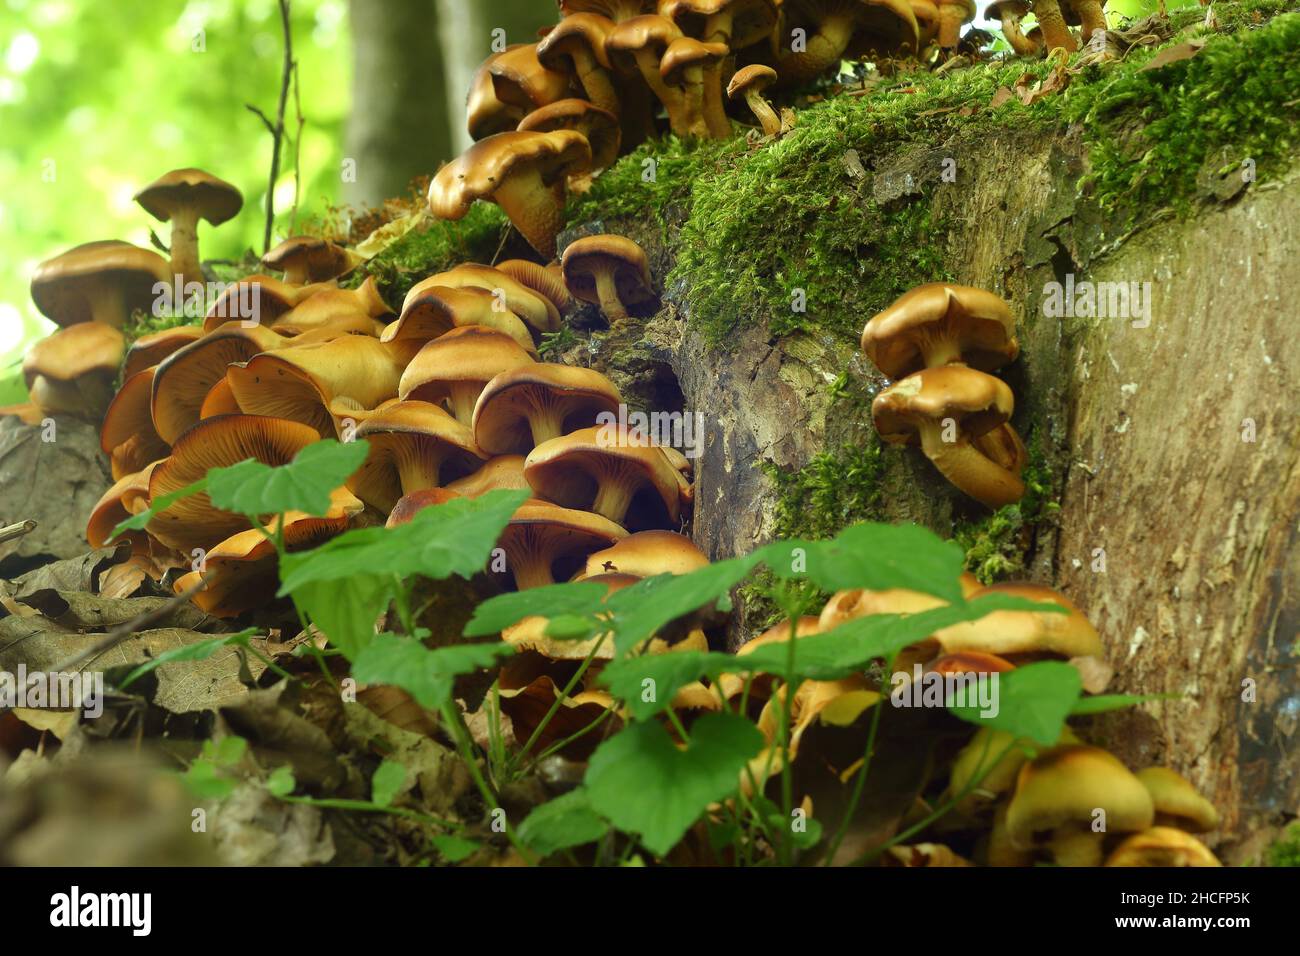 Brown arboreal mushrooms grown in the forest in autu Stock Photo